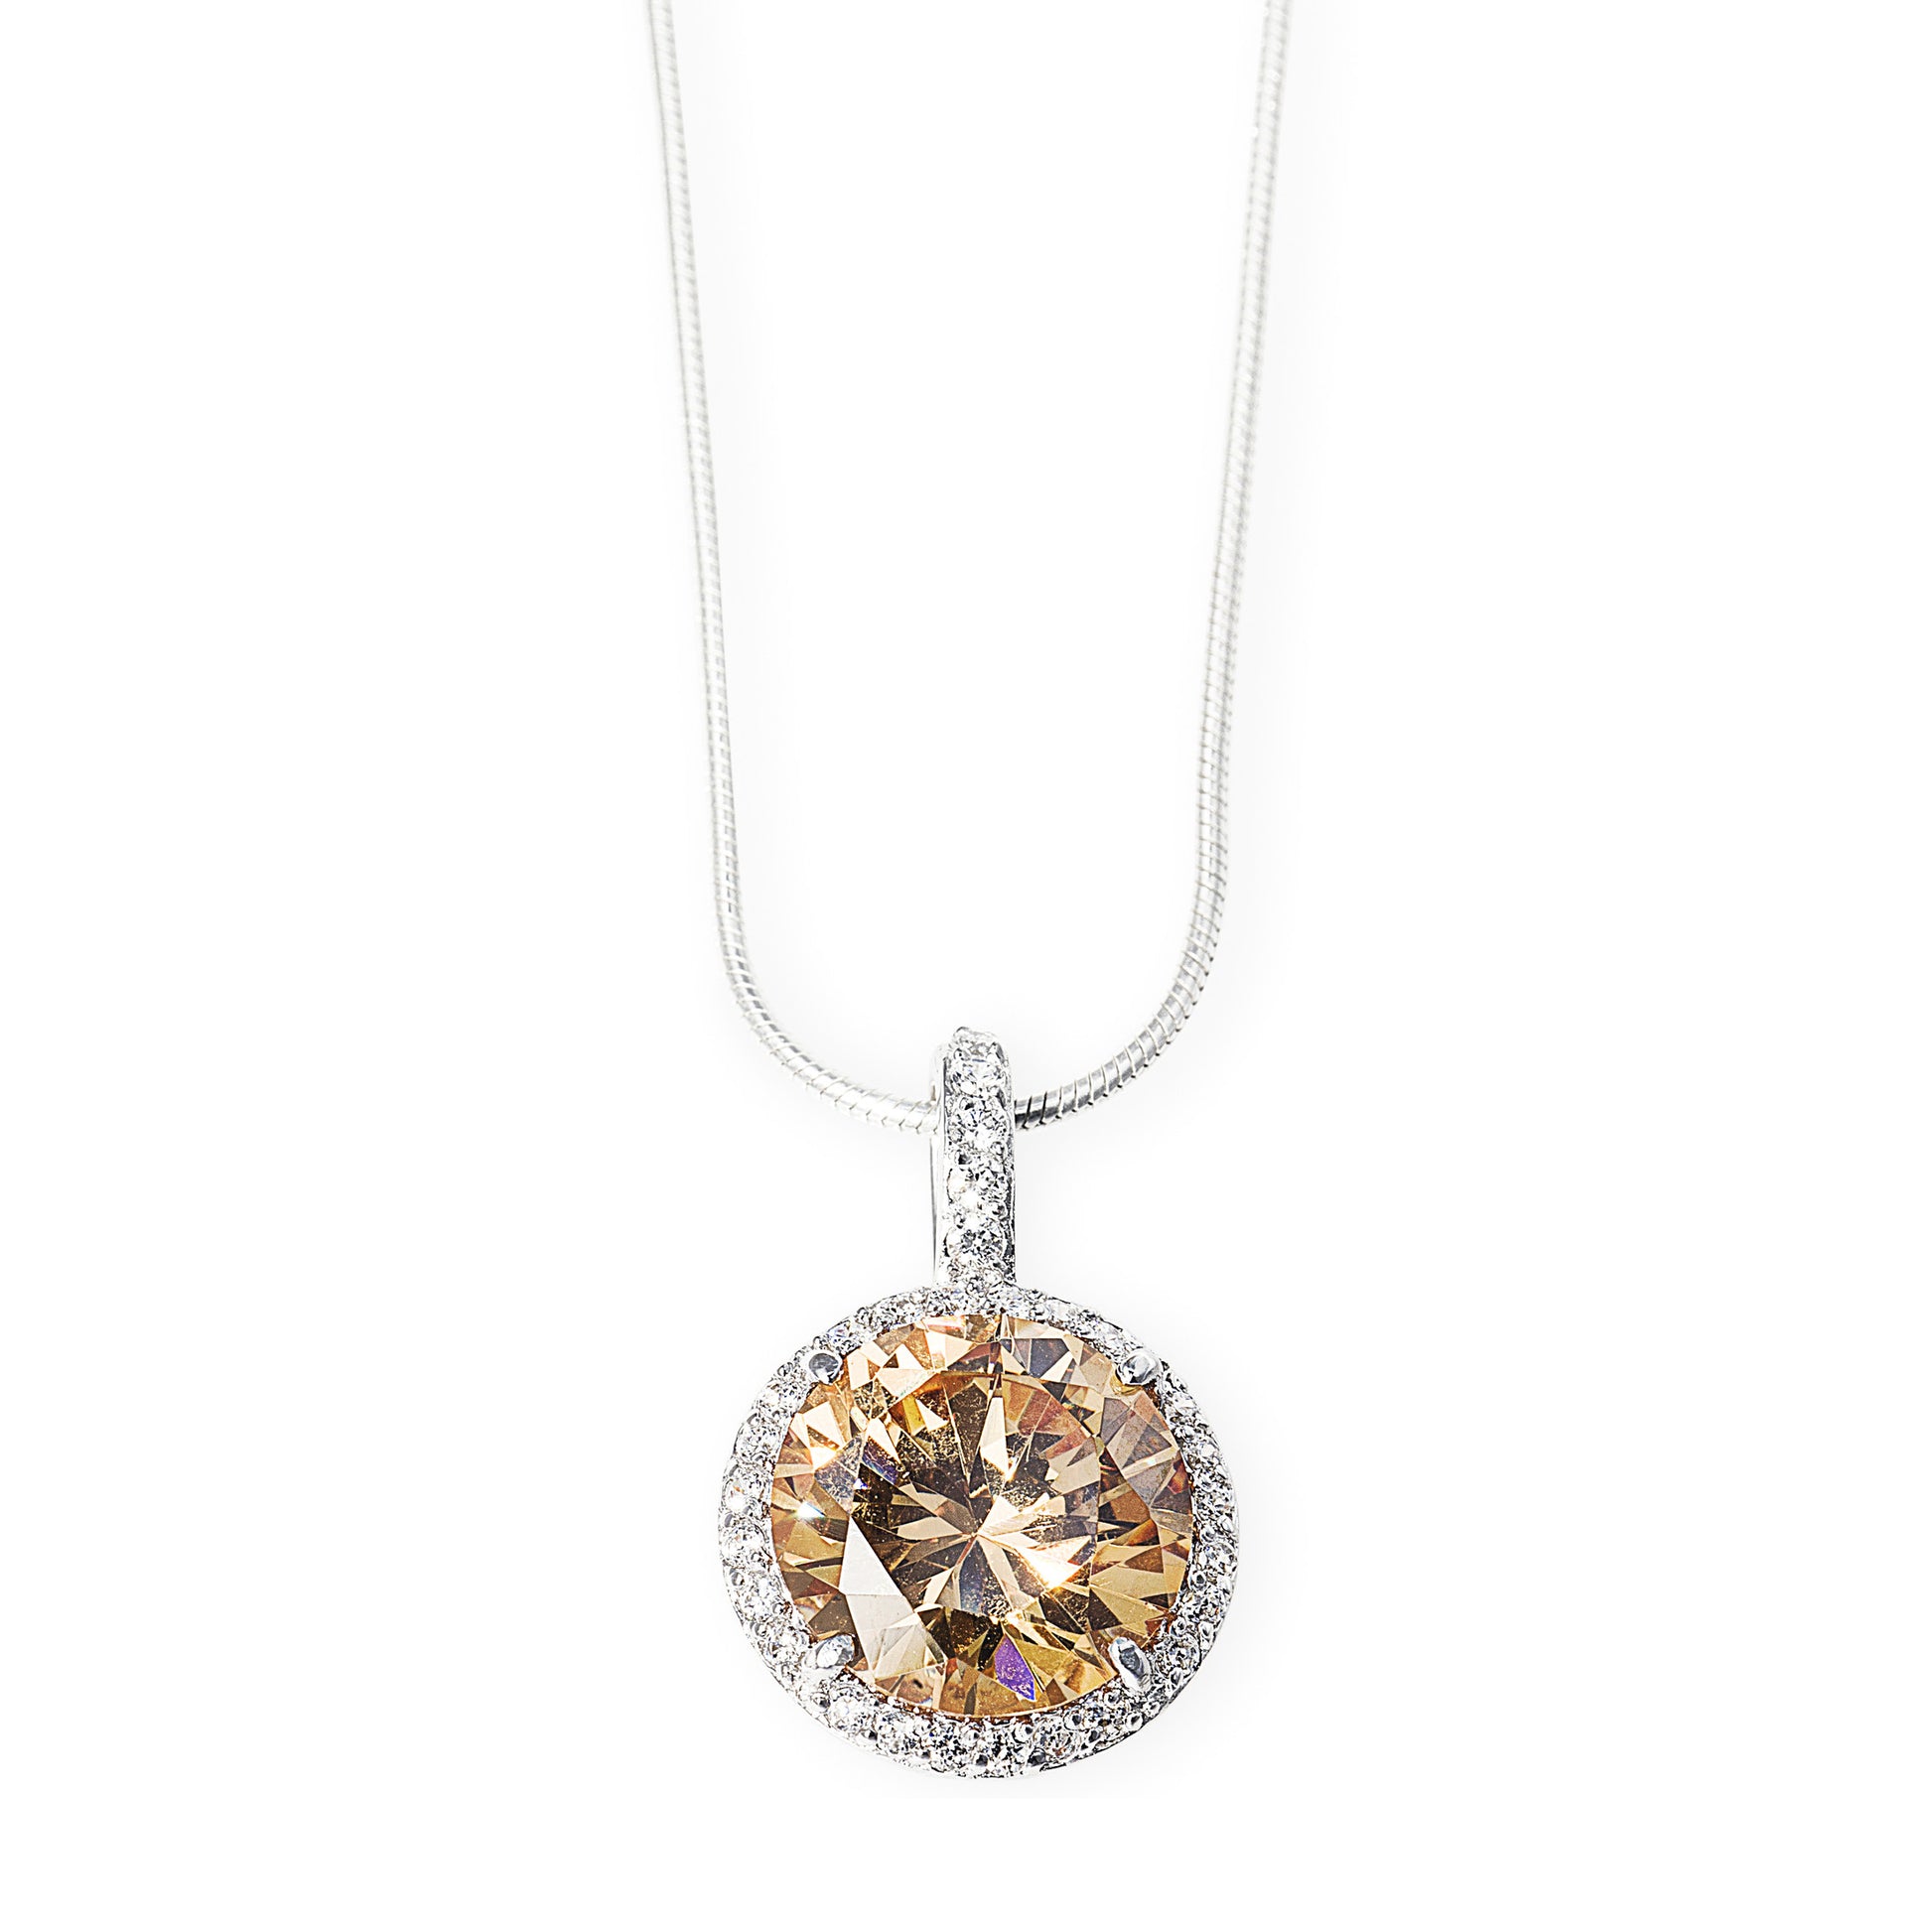 The Empire Necklace is a hanging antique style 925 sterling silver necklace featuring a large regal champagne cubic zirconia stone. Worldwide shipping. 